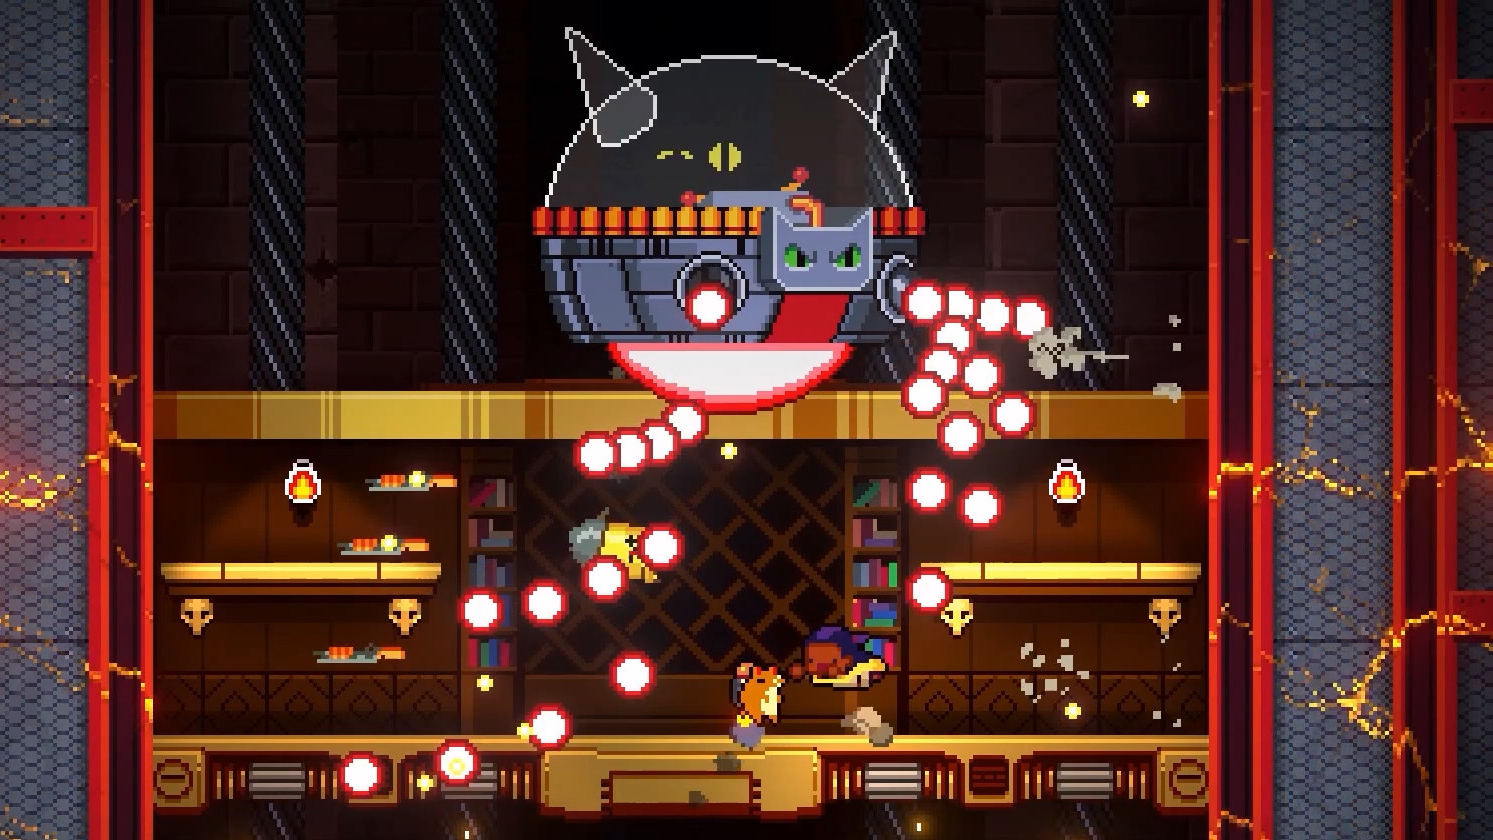 Exit The Gungeon Is A Bite-Sized Good Time, If You Can Deal With The Randomness